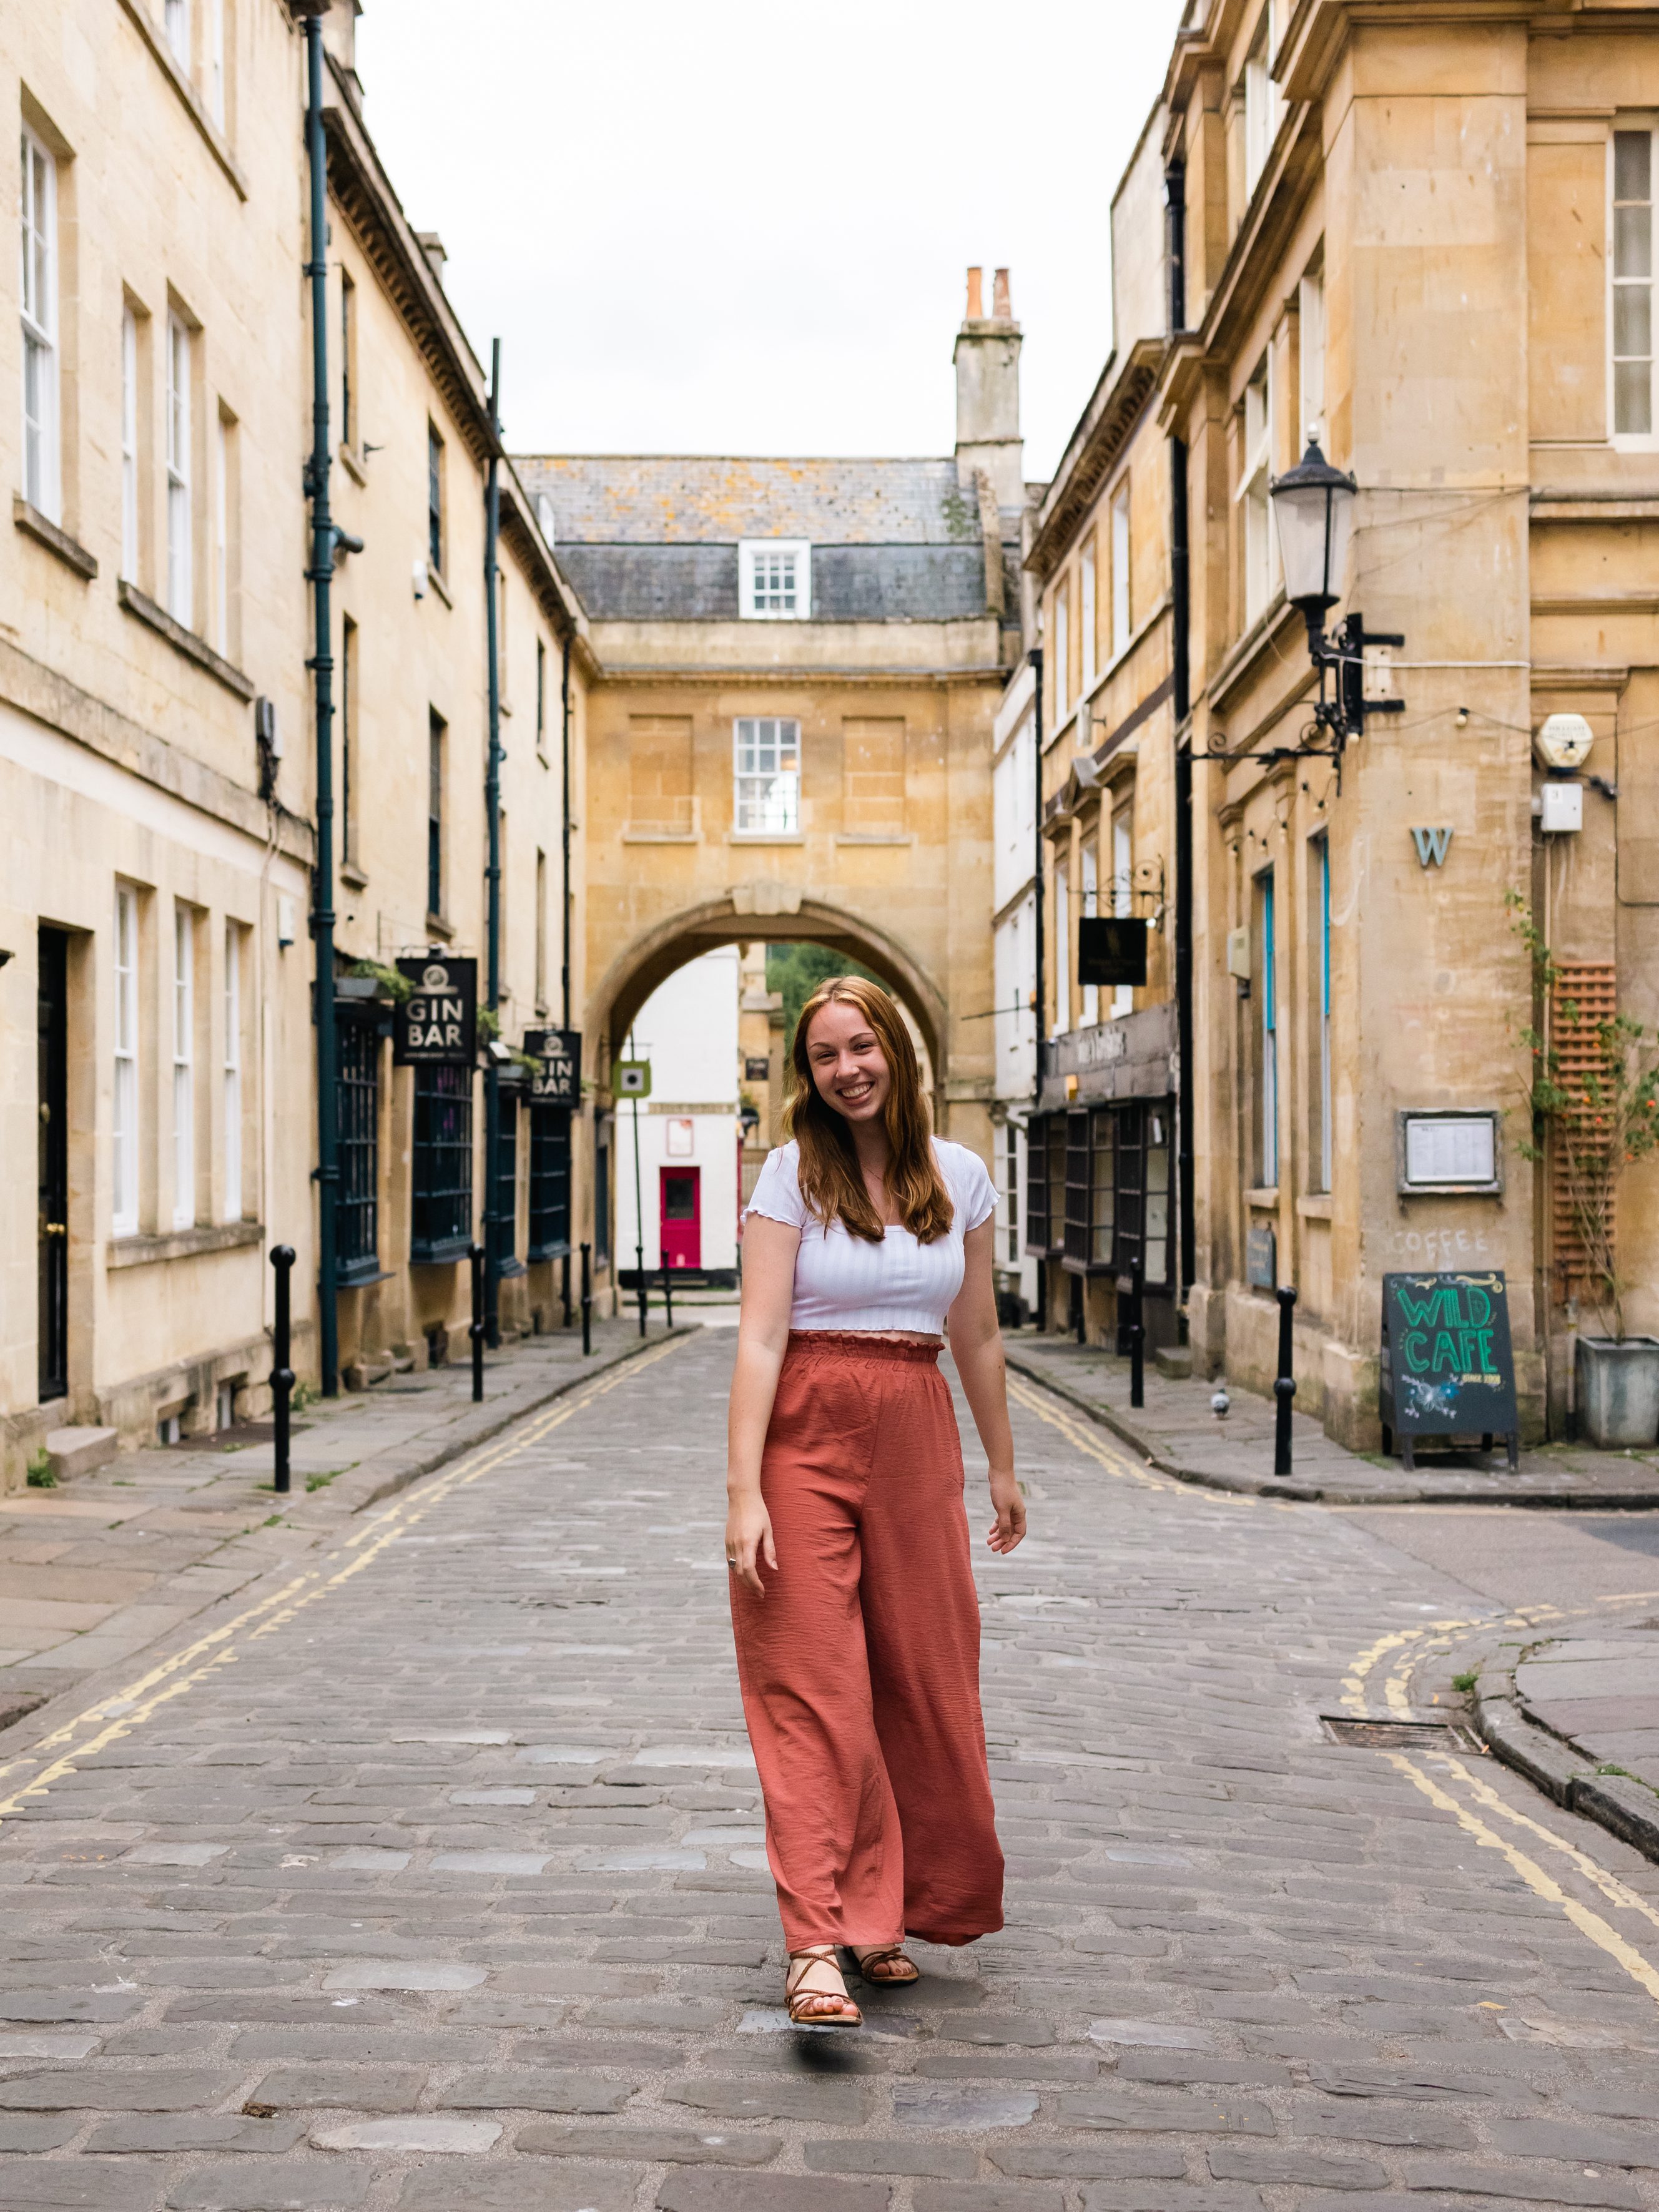 A girl walks down a stone street lined with tan buildings in Bath, England.